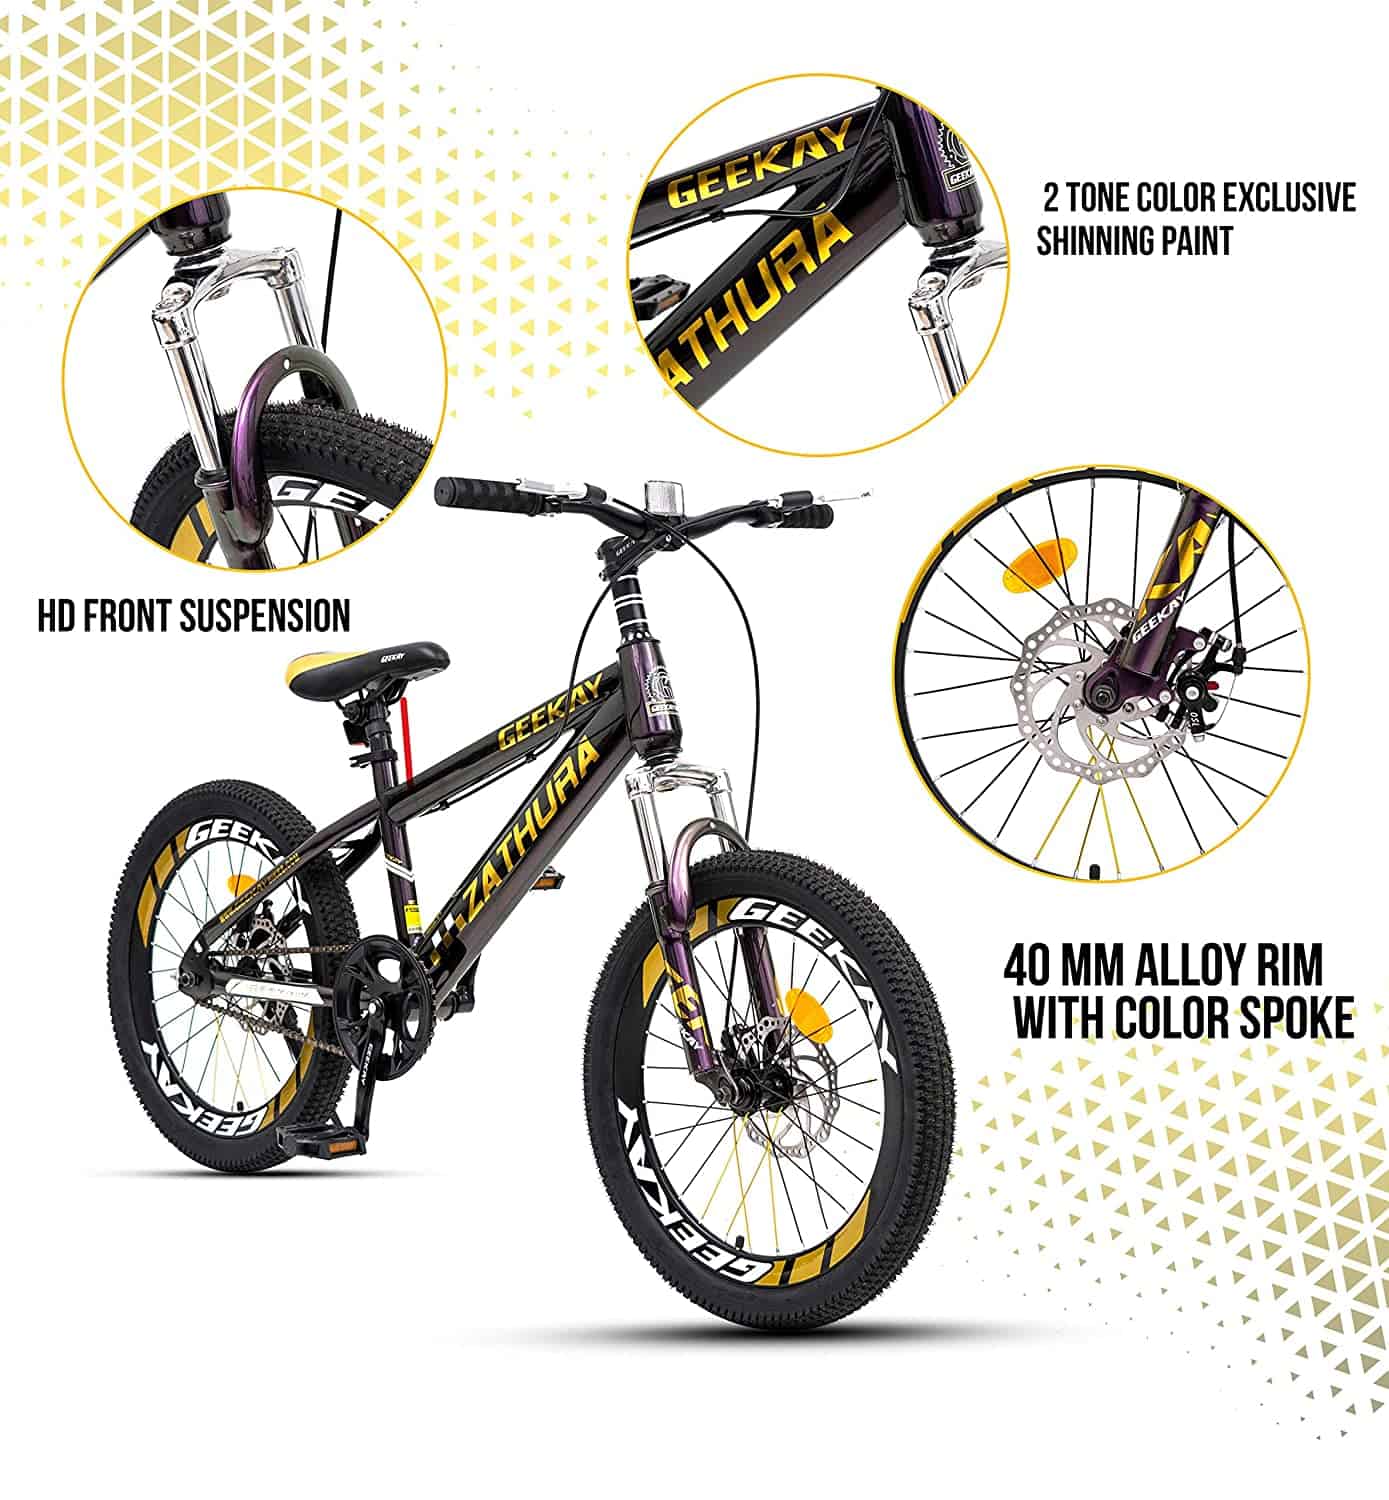 Geekay Kids Cycle 20 inch non gear wheel for boys girls Bicycle | Single Speed bmx kids mountain bike for 7 to 10 year | Ideal height 3'9" to 4'.3" kids | Latest 2 Tone Sparkle Color Finish 85% Fitted bike | Zathura 20" Unisex Cycle